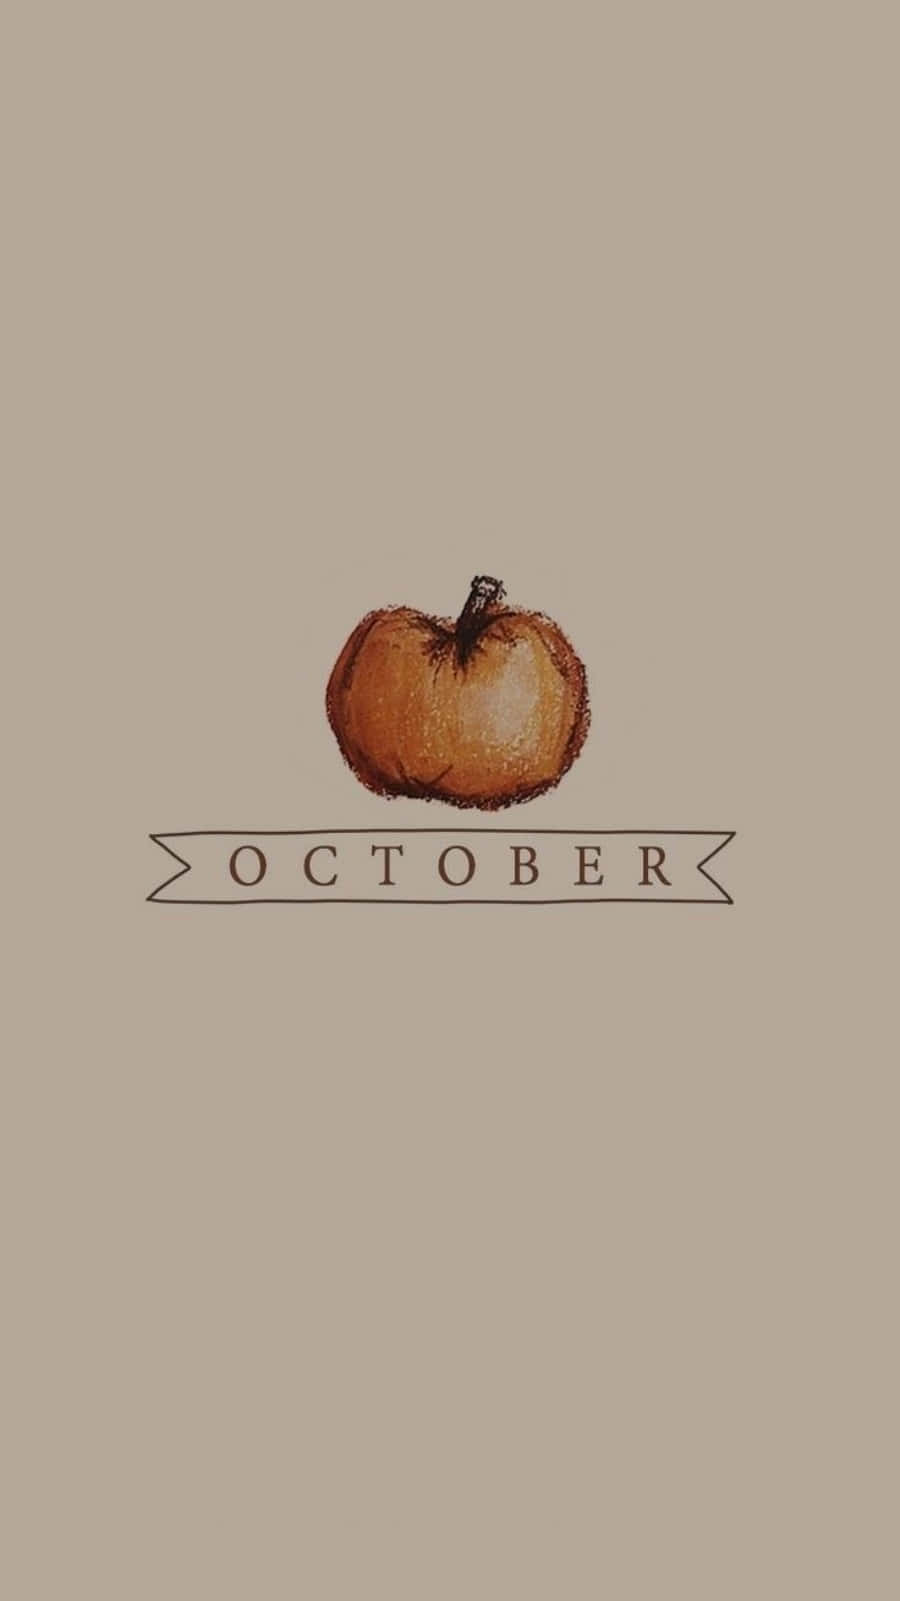 Embrace the beauty of October Wallpaper